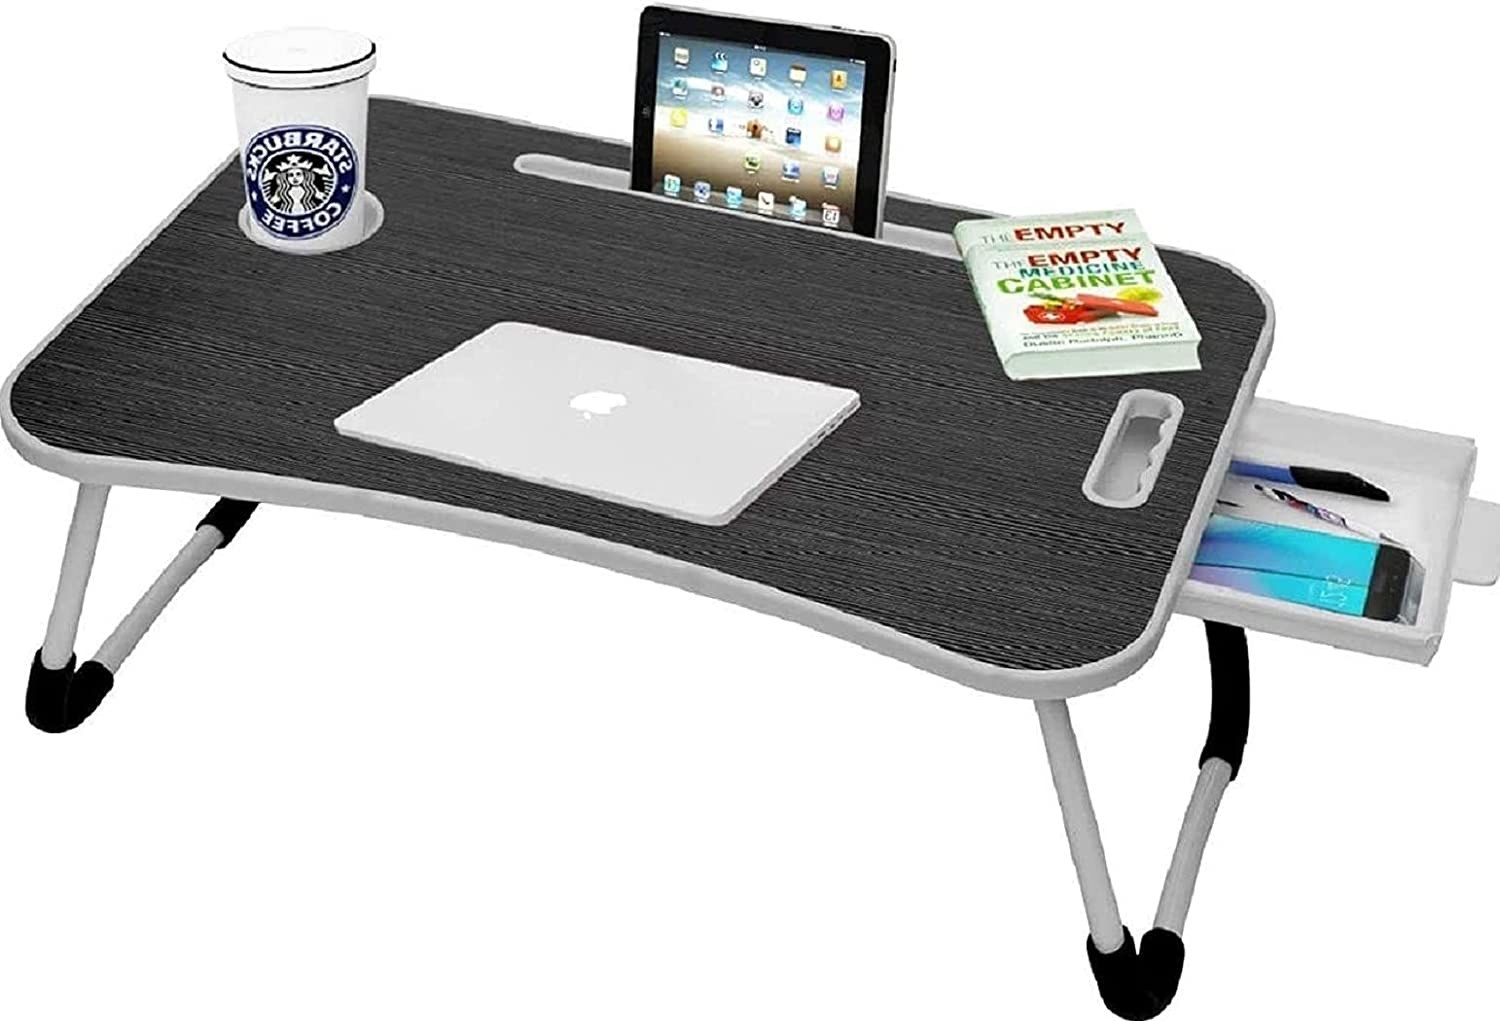 A Callas Laptop Table in black holding a cup, a book, and various computing devices. 